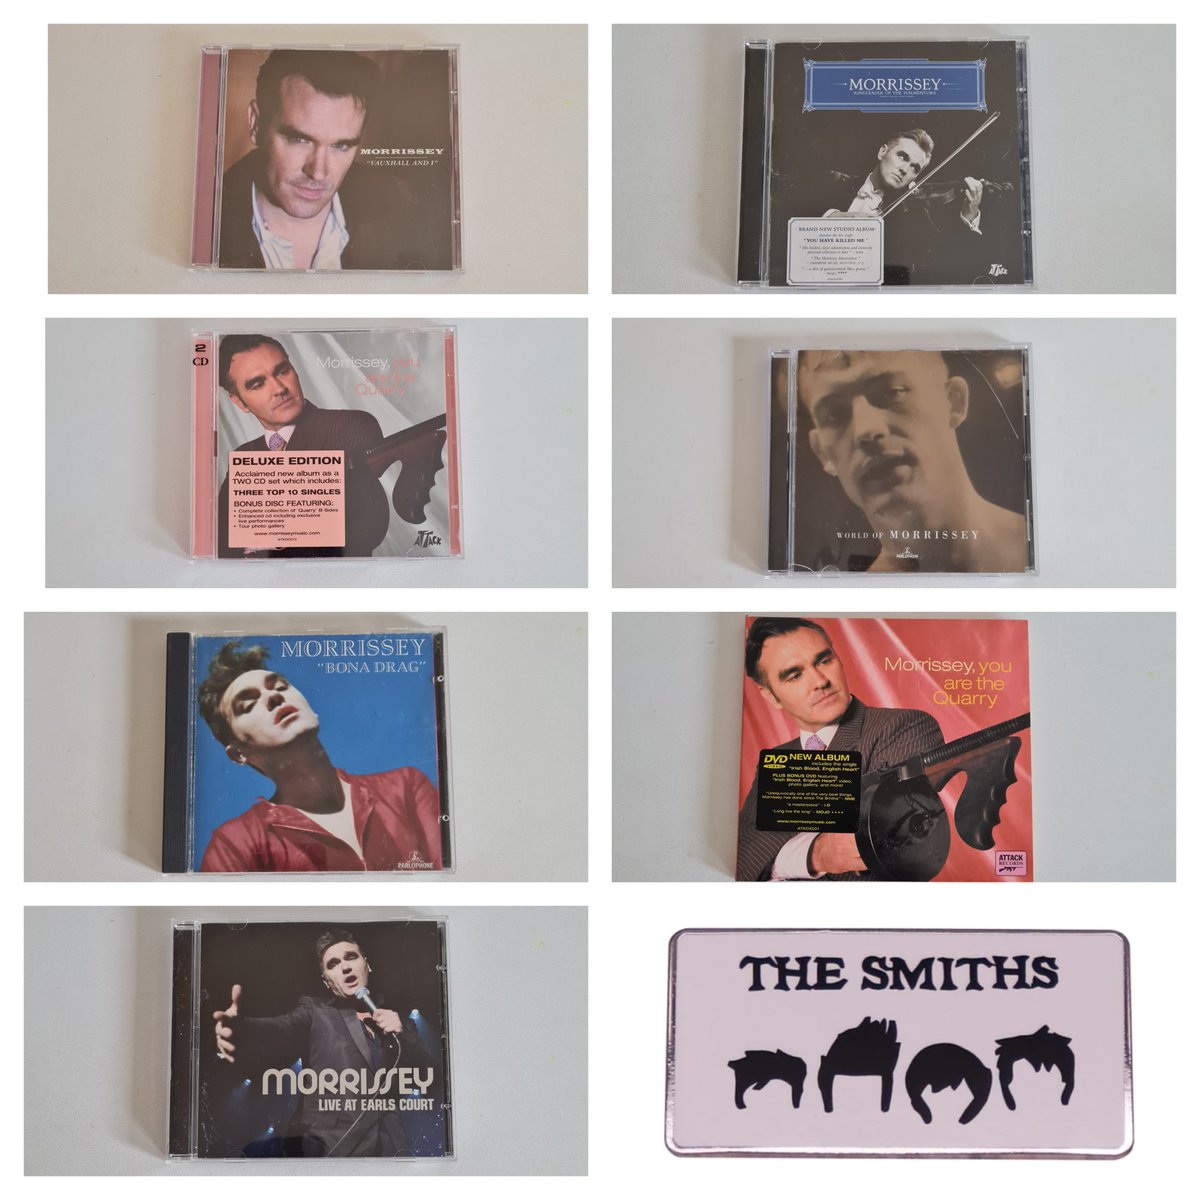 The Smiths and Morrissey stuff available over on t'ebay for your perusal 

* Ebay link in bio *

#thesmiths #TheSmiths #Morrissey #JohnnyMarr #mikejoyce #andyrourke #hatfulofhollow #thequeenisdead #meatismurder #theworldwontlisten #louderthanbombs #bonadrag #youaremyquarry